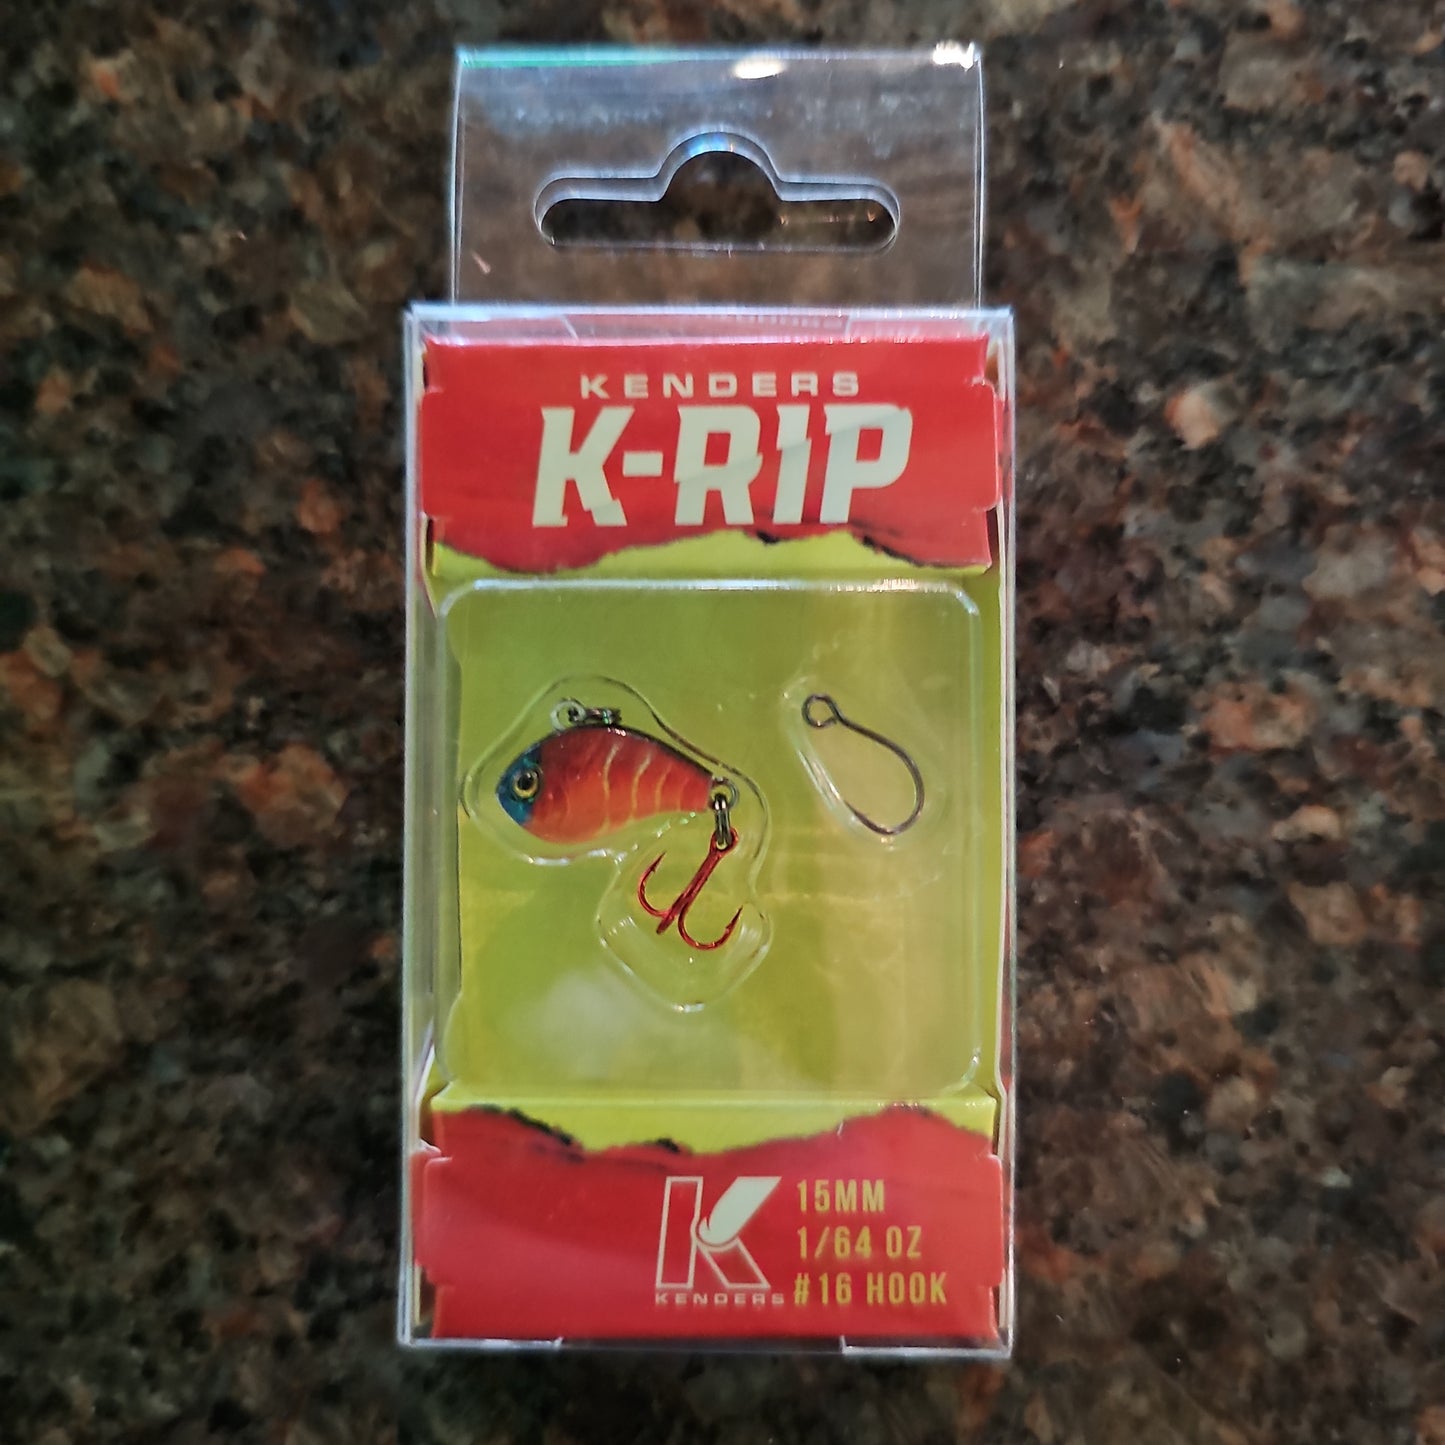 Kenders K-RIP Mini Vibe Lure with Rattle Beads and Treble Hook (Gold Magma, 15mm (1/2") #16 Hook